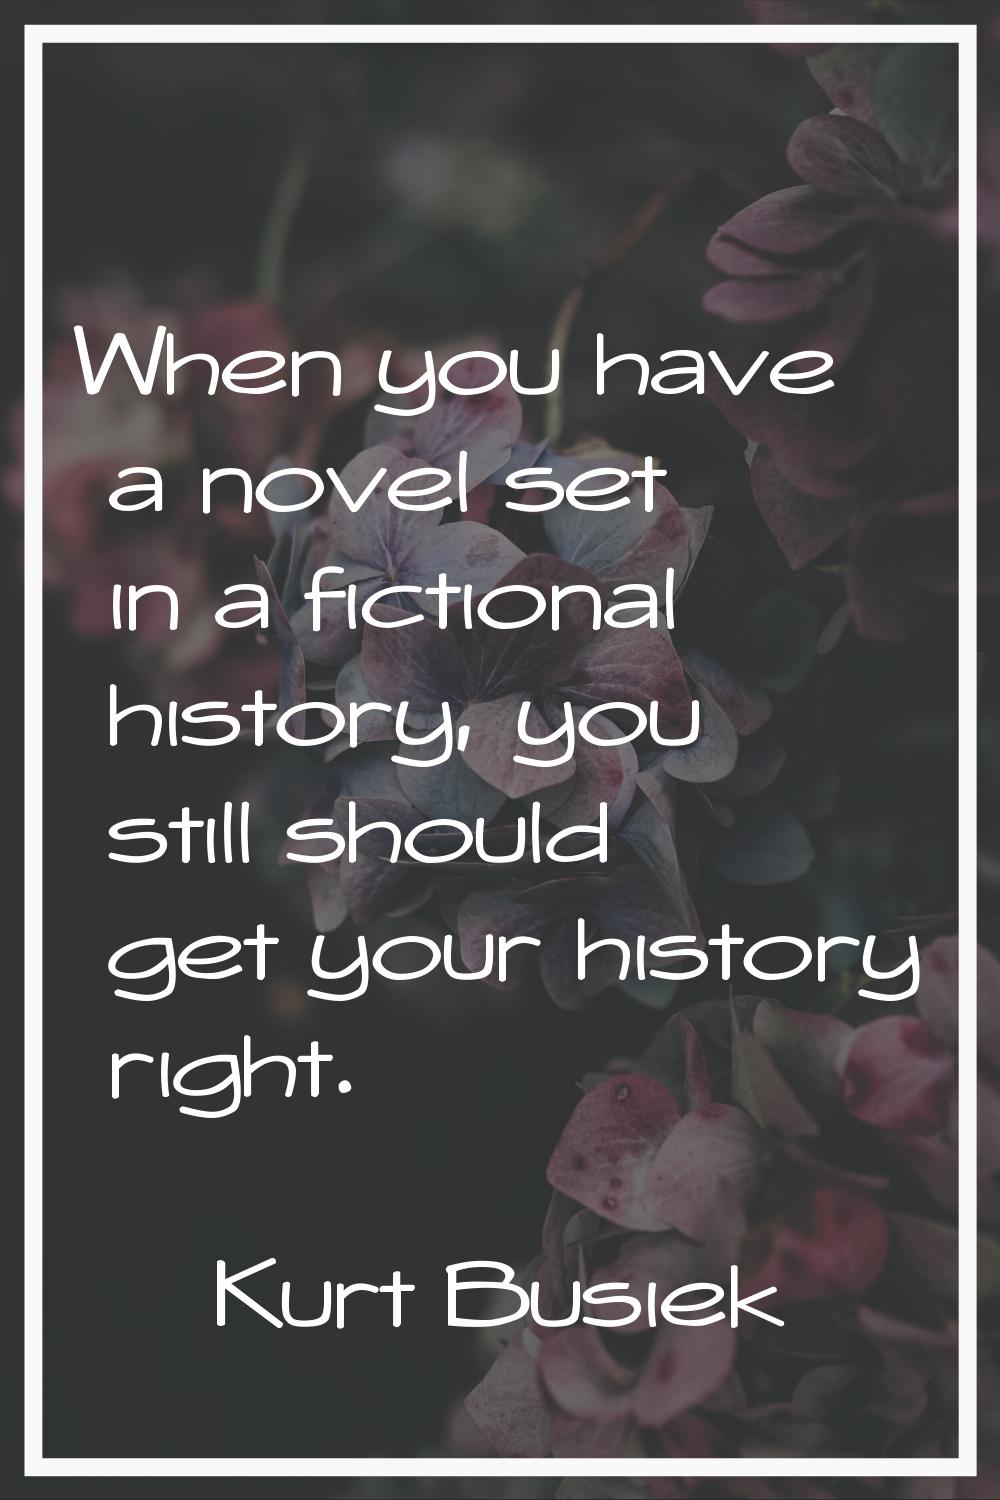 When you have a novel set in a fictional history, you still should get your history right.